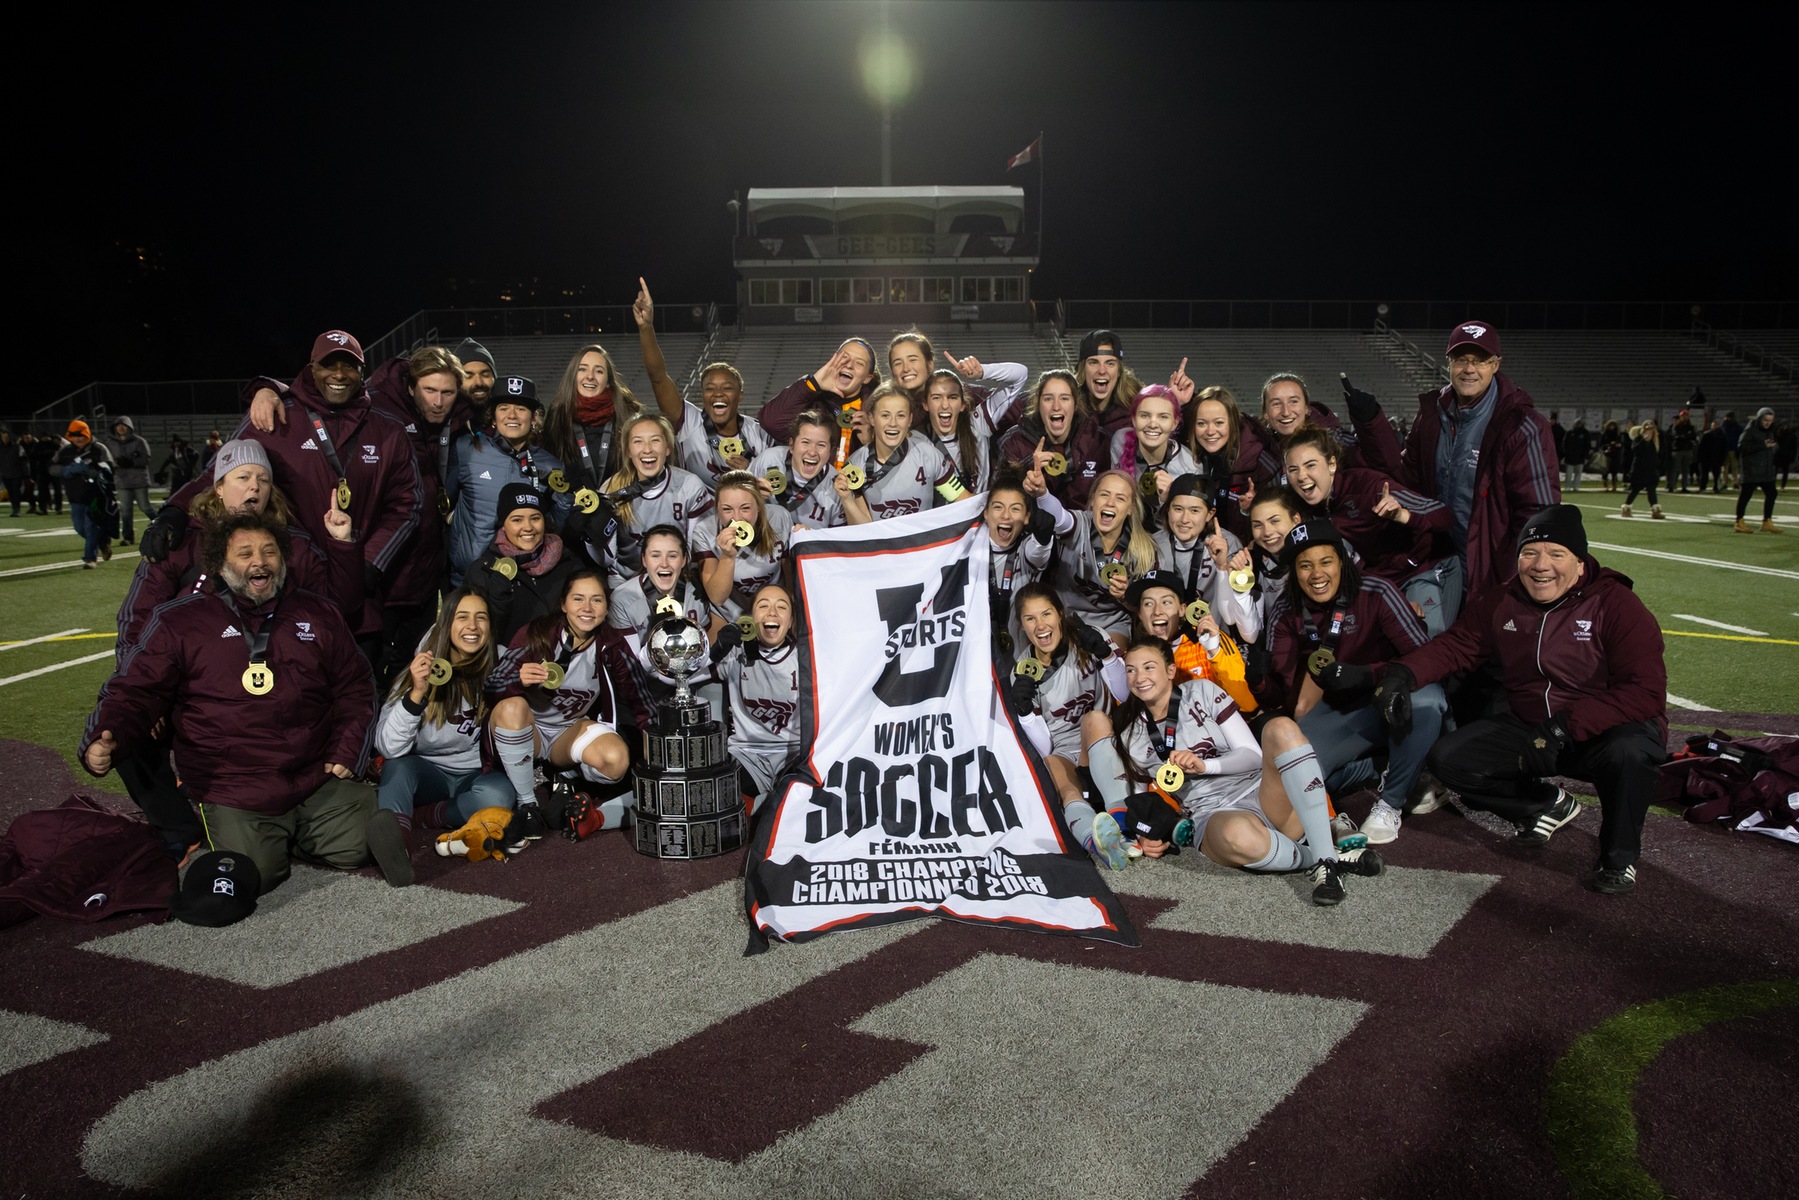 Soccer team group photo on field with U SPORTS championship banner.